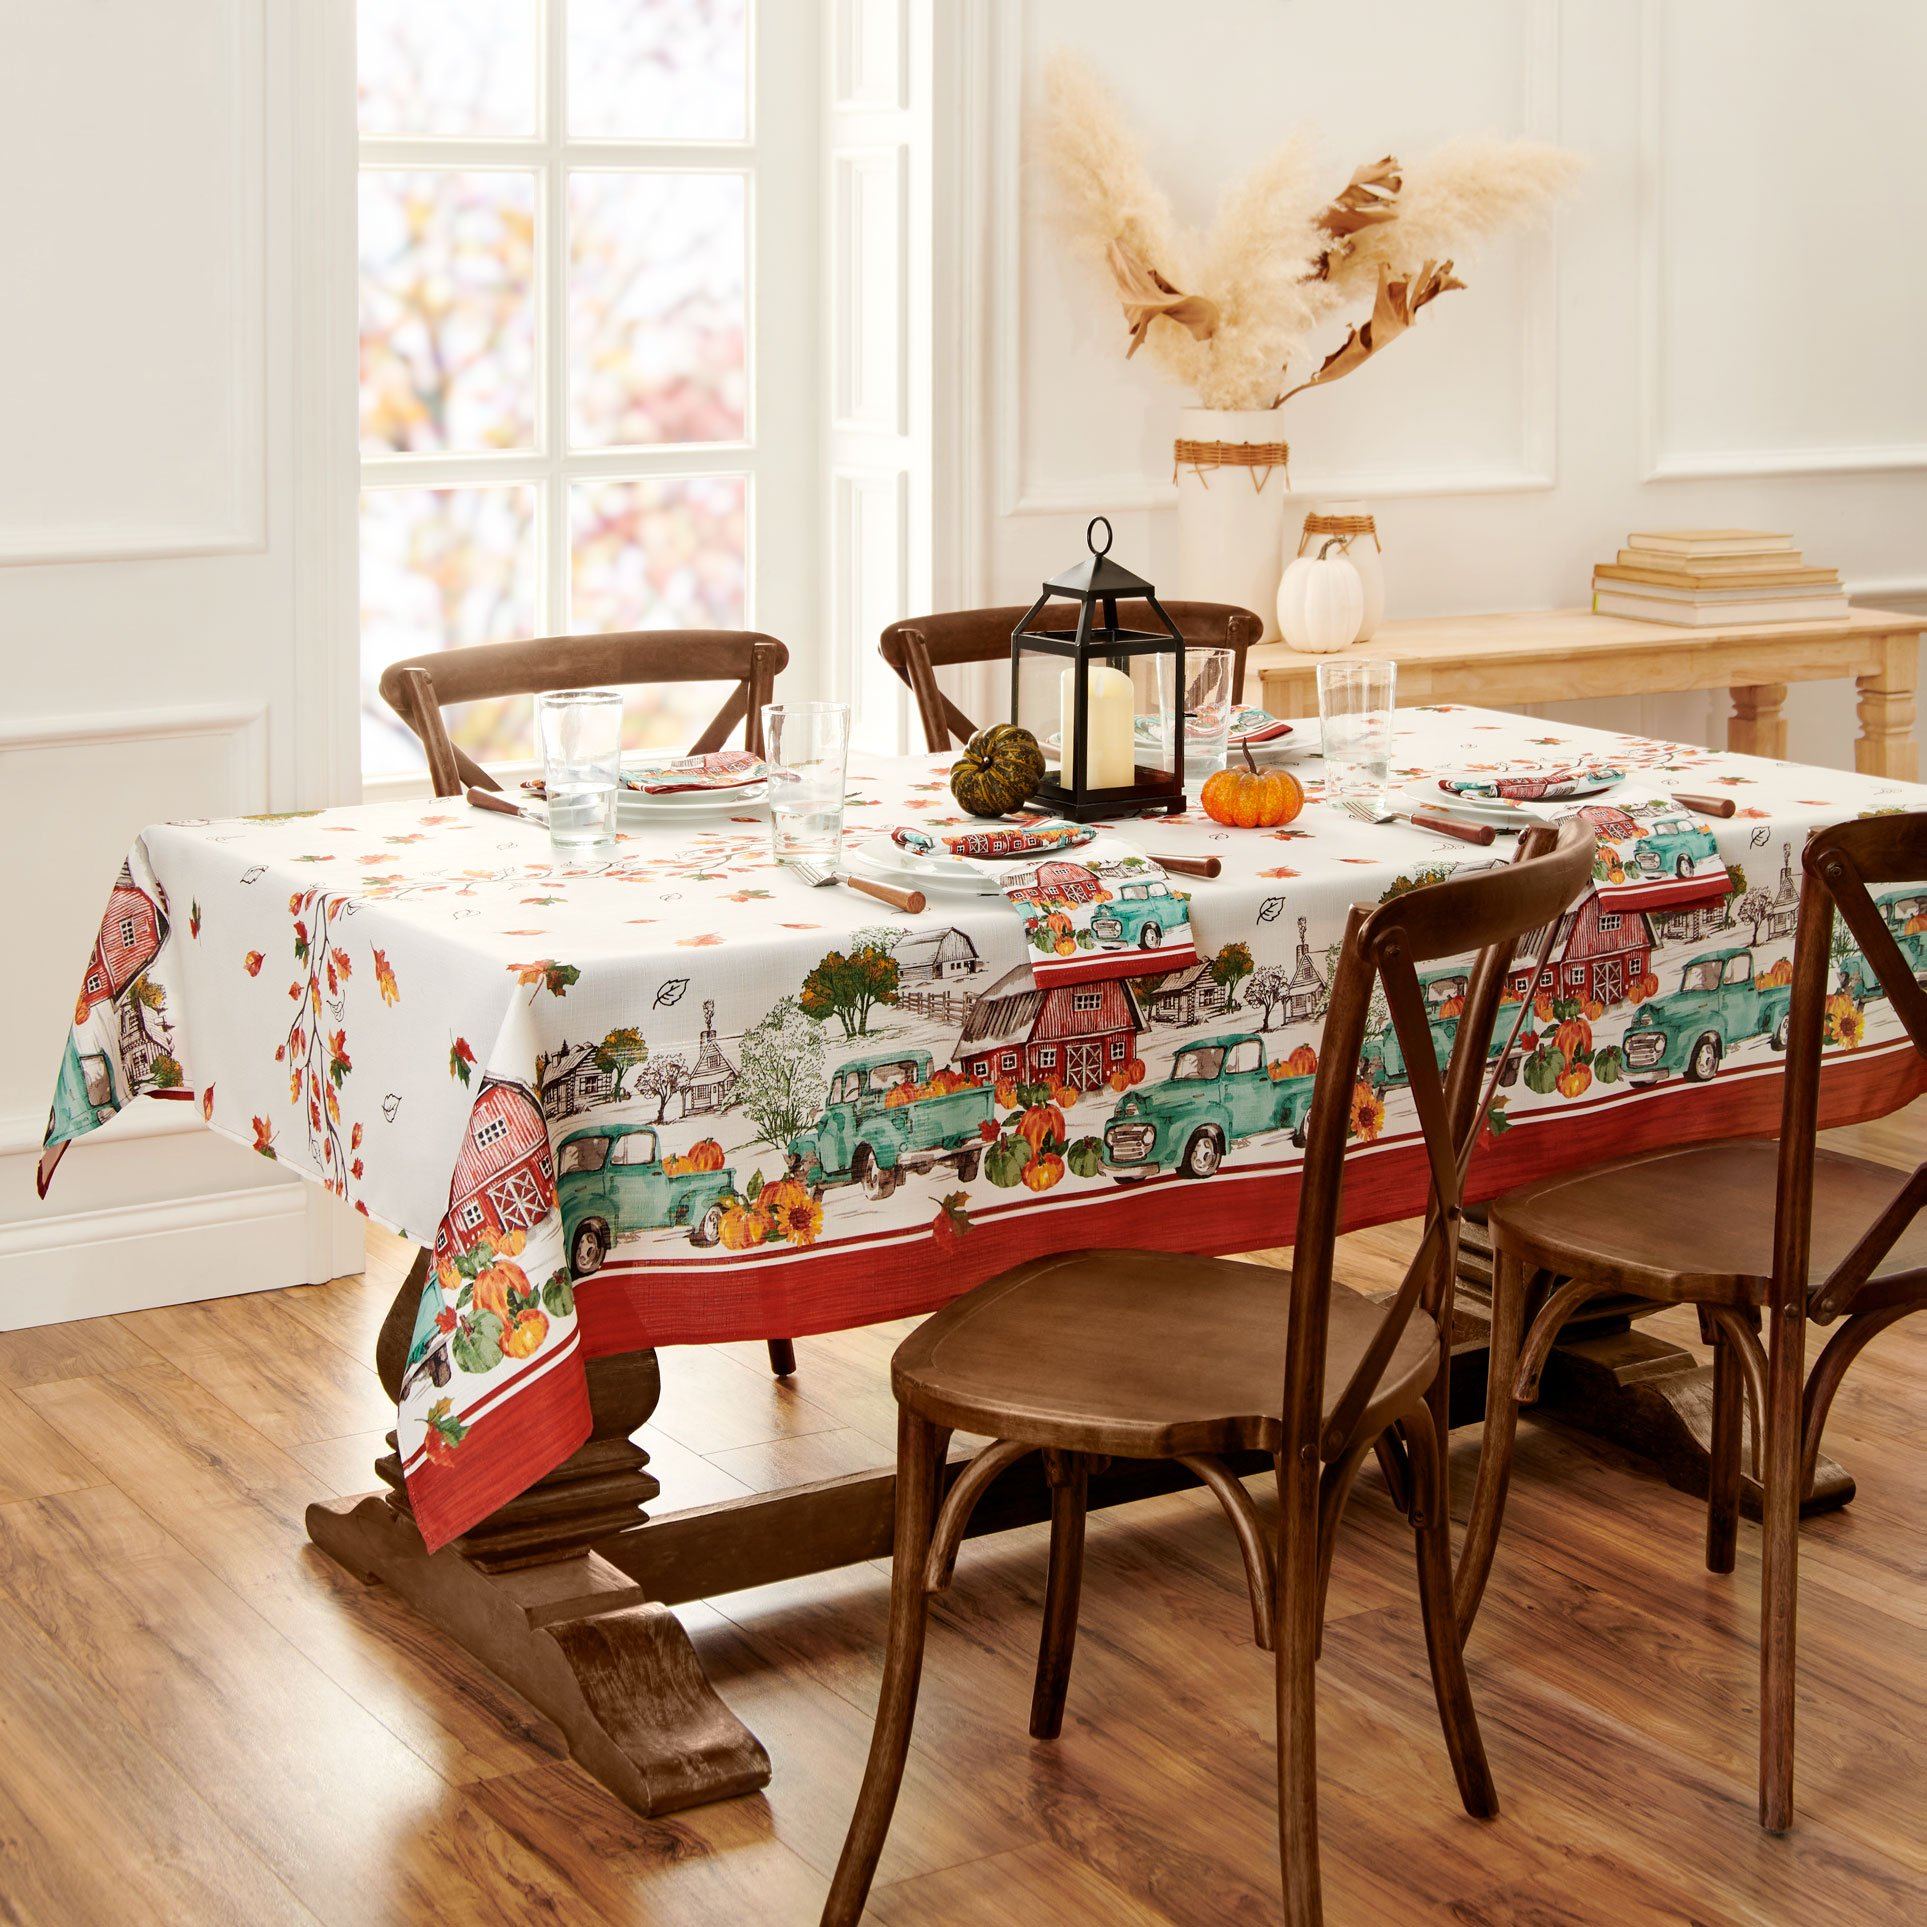 Blue farm truck, red barn and pumpkin boarder tablecloth with fall leaves center design